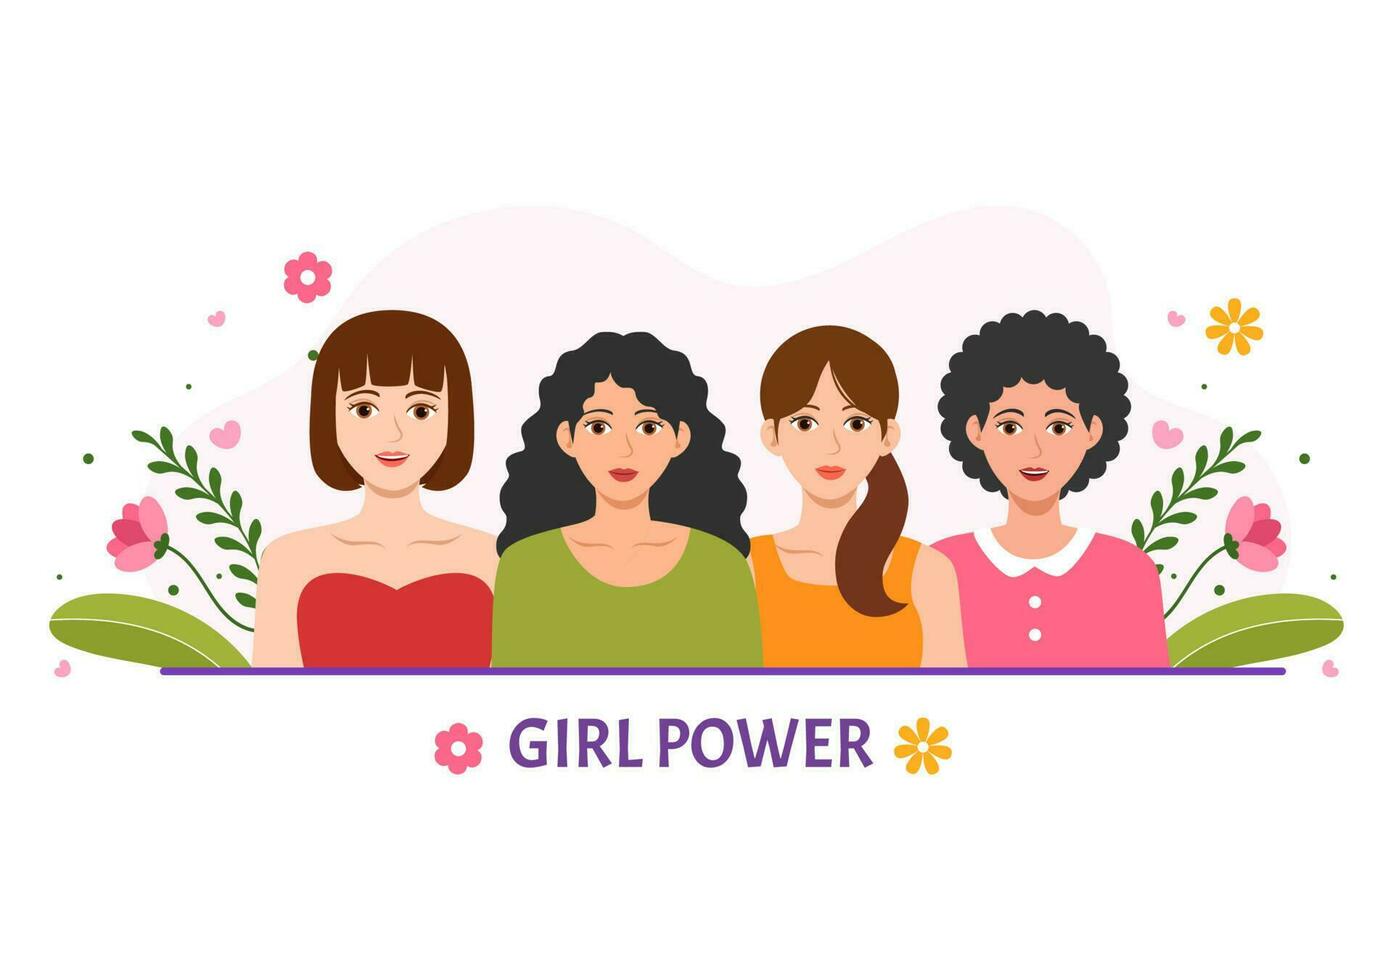 Girl Power Vector Illustration to Show Women Can Also Be Stronger and Independent in Woman Rights and Diversity Flat Cartoon Hand Drawn Templates